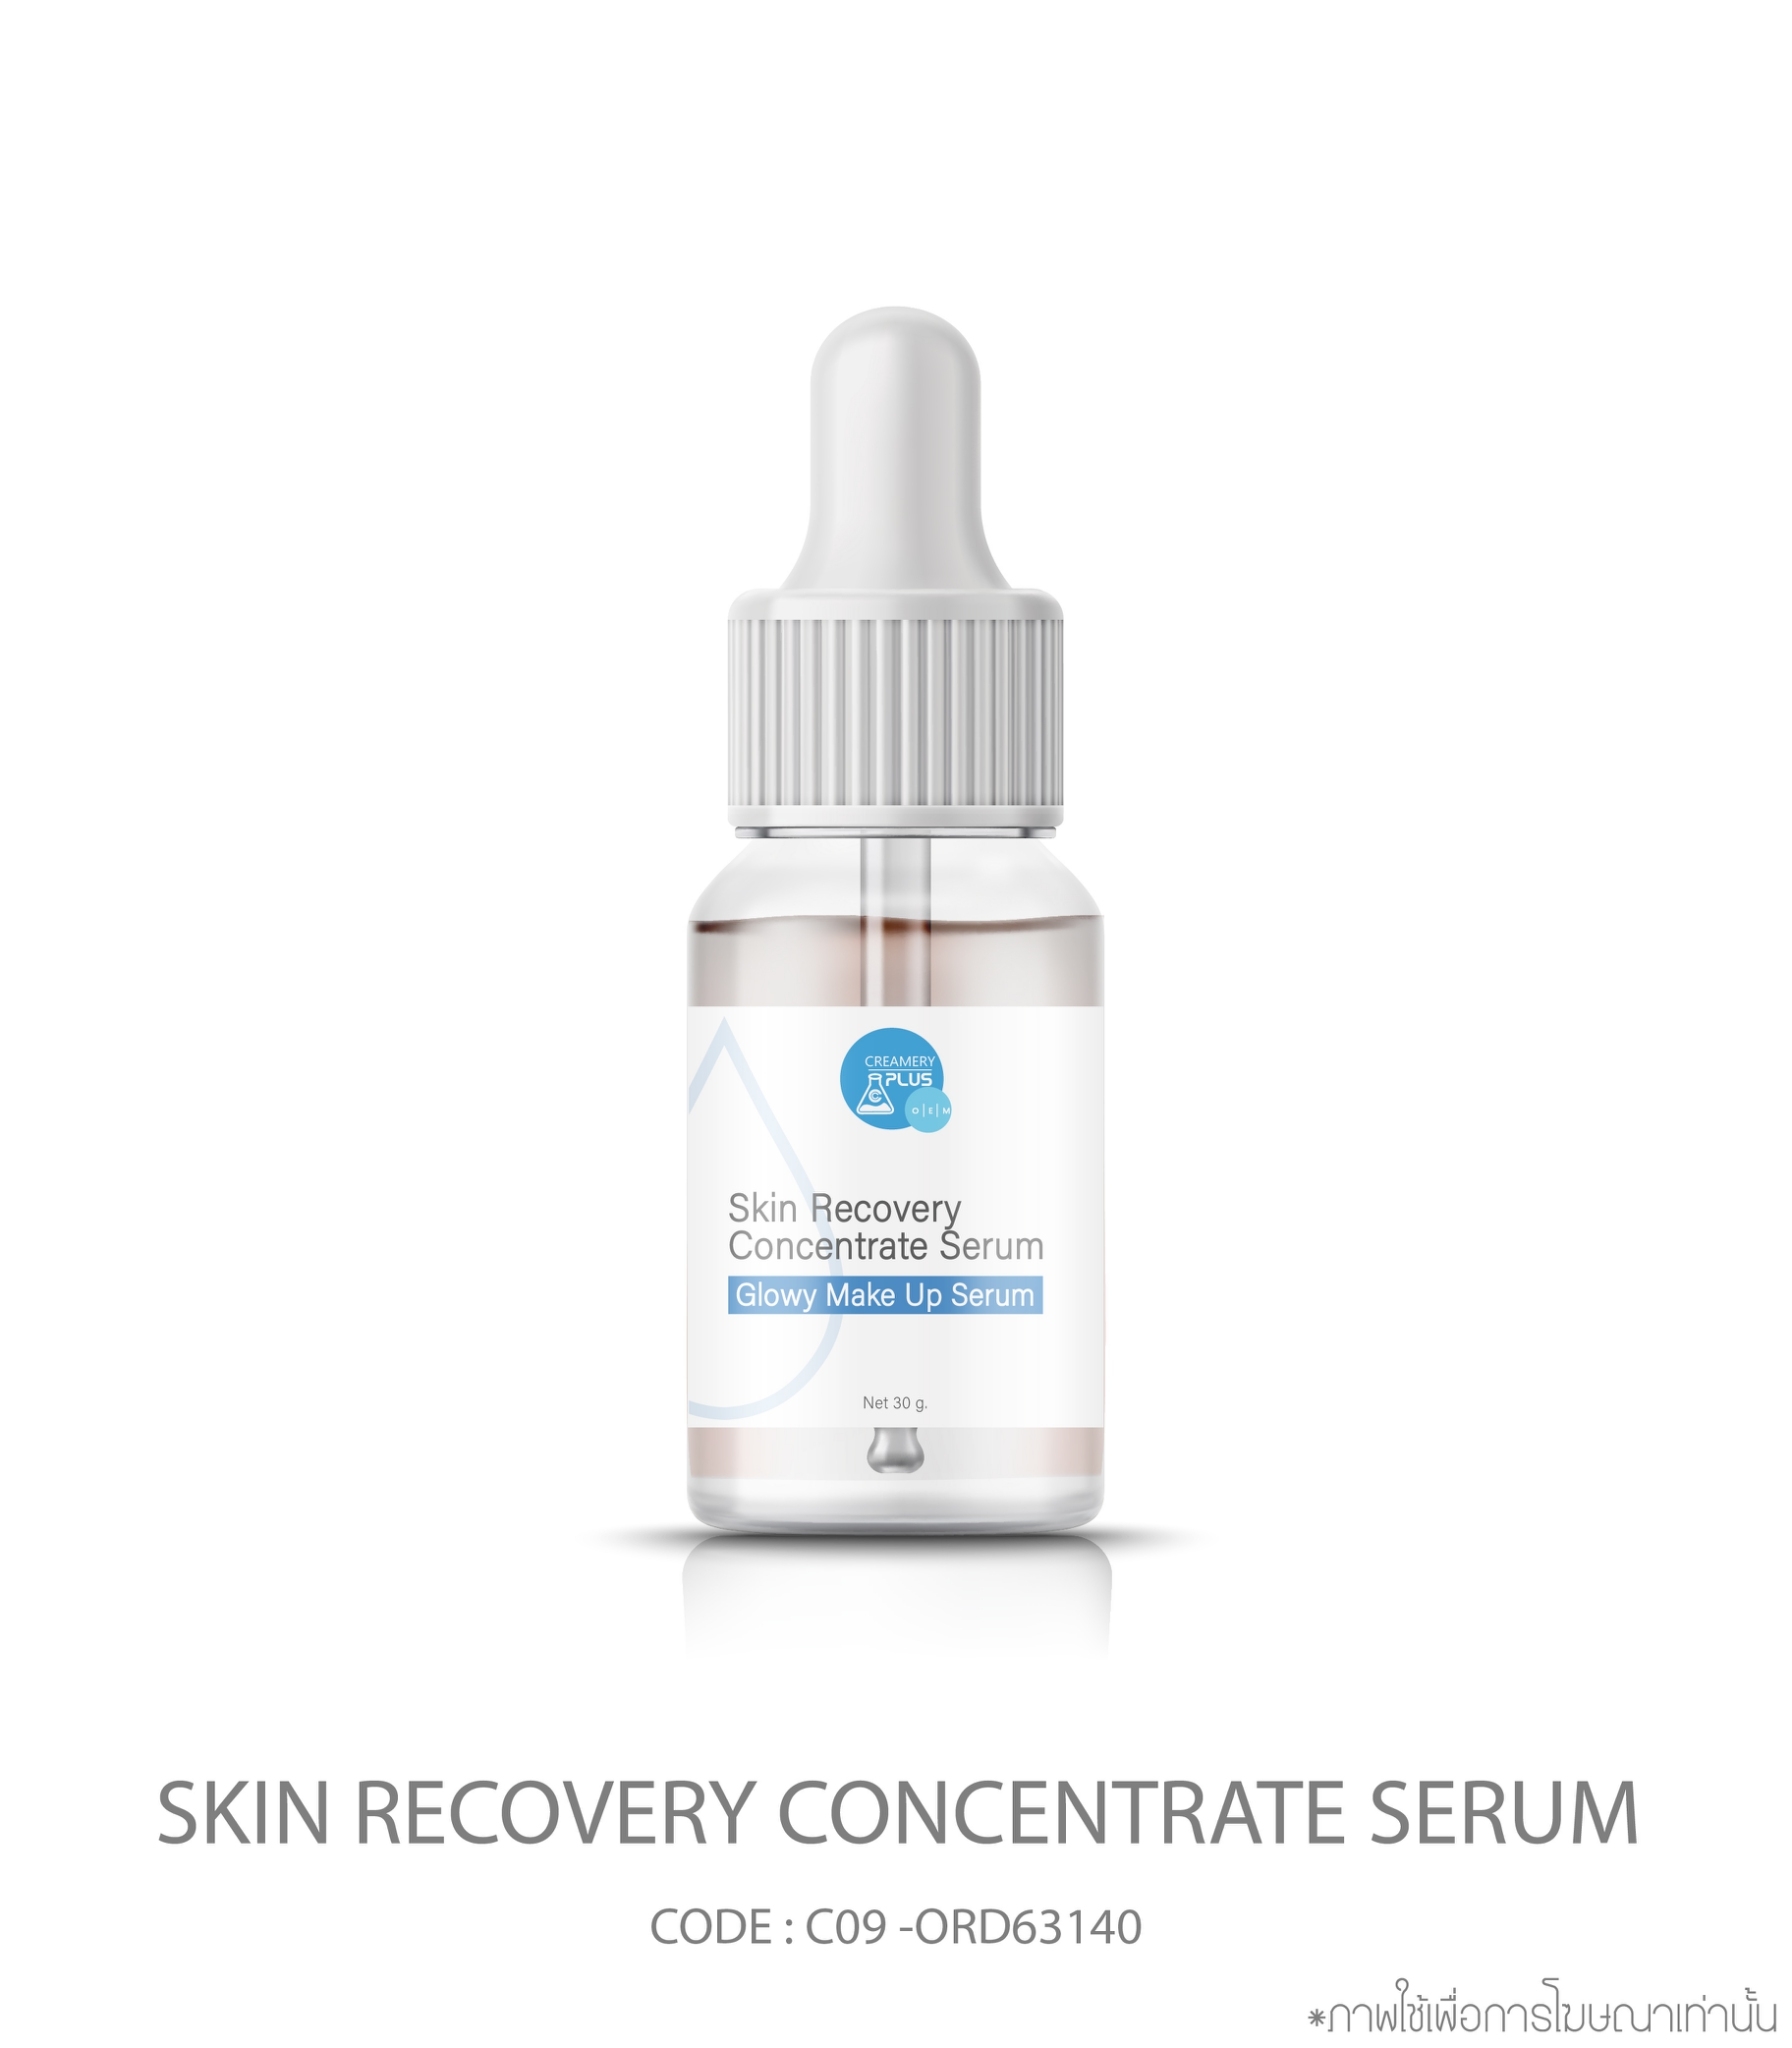 Skin Recovery Concentrate Serum